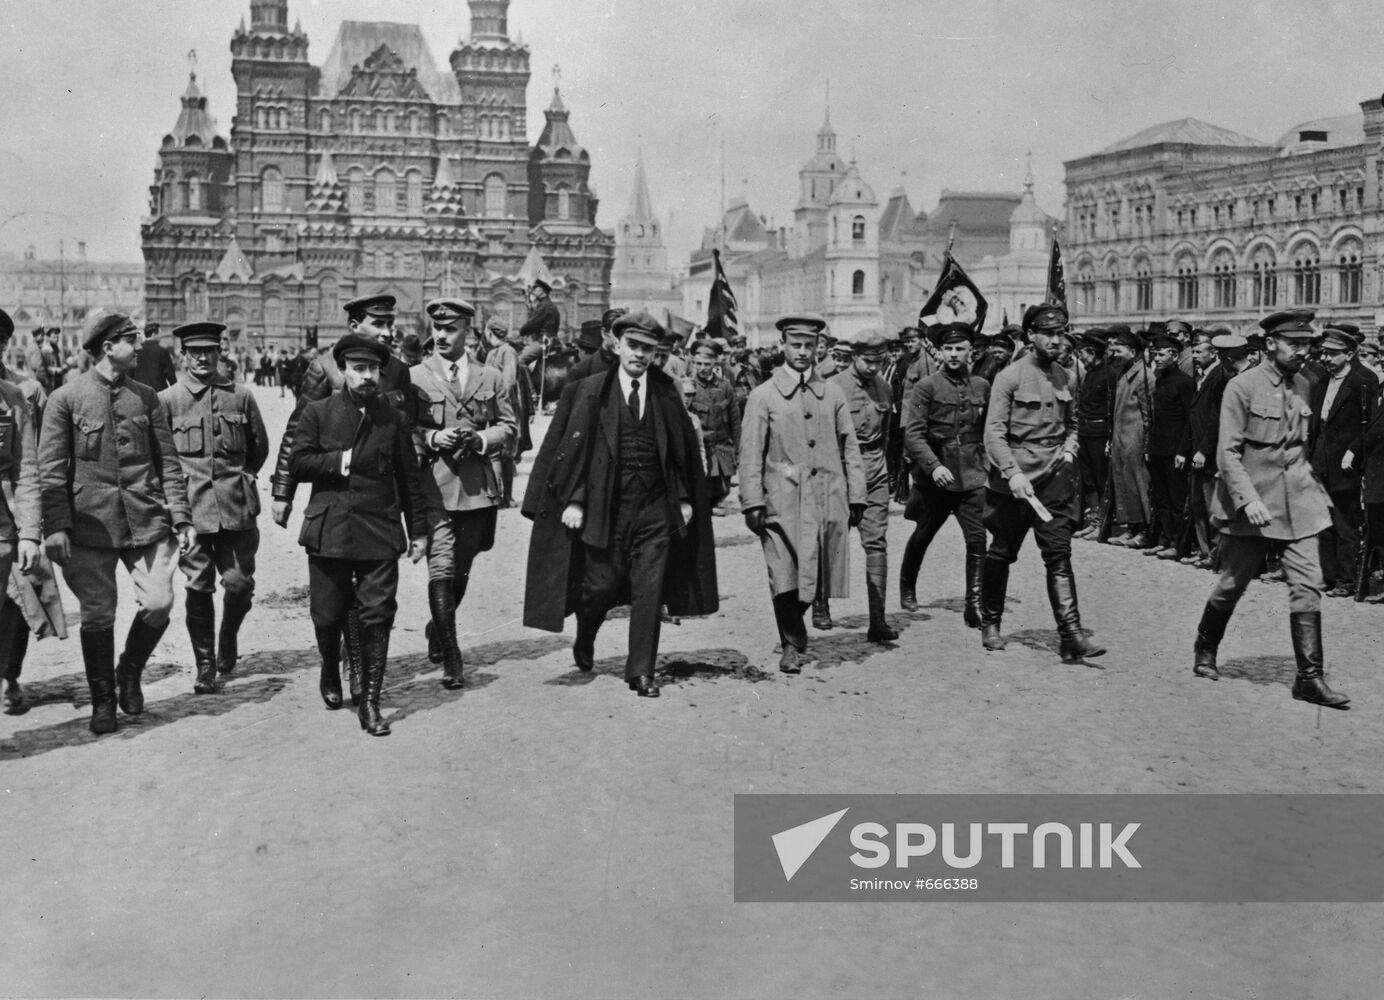 Vladimir Lenin with a group of commanders surveys soldiers